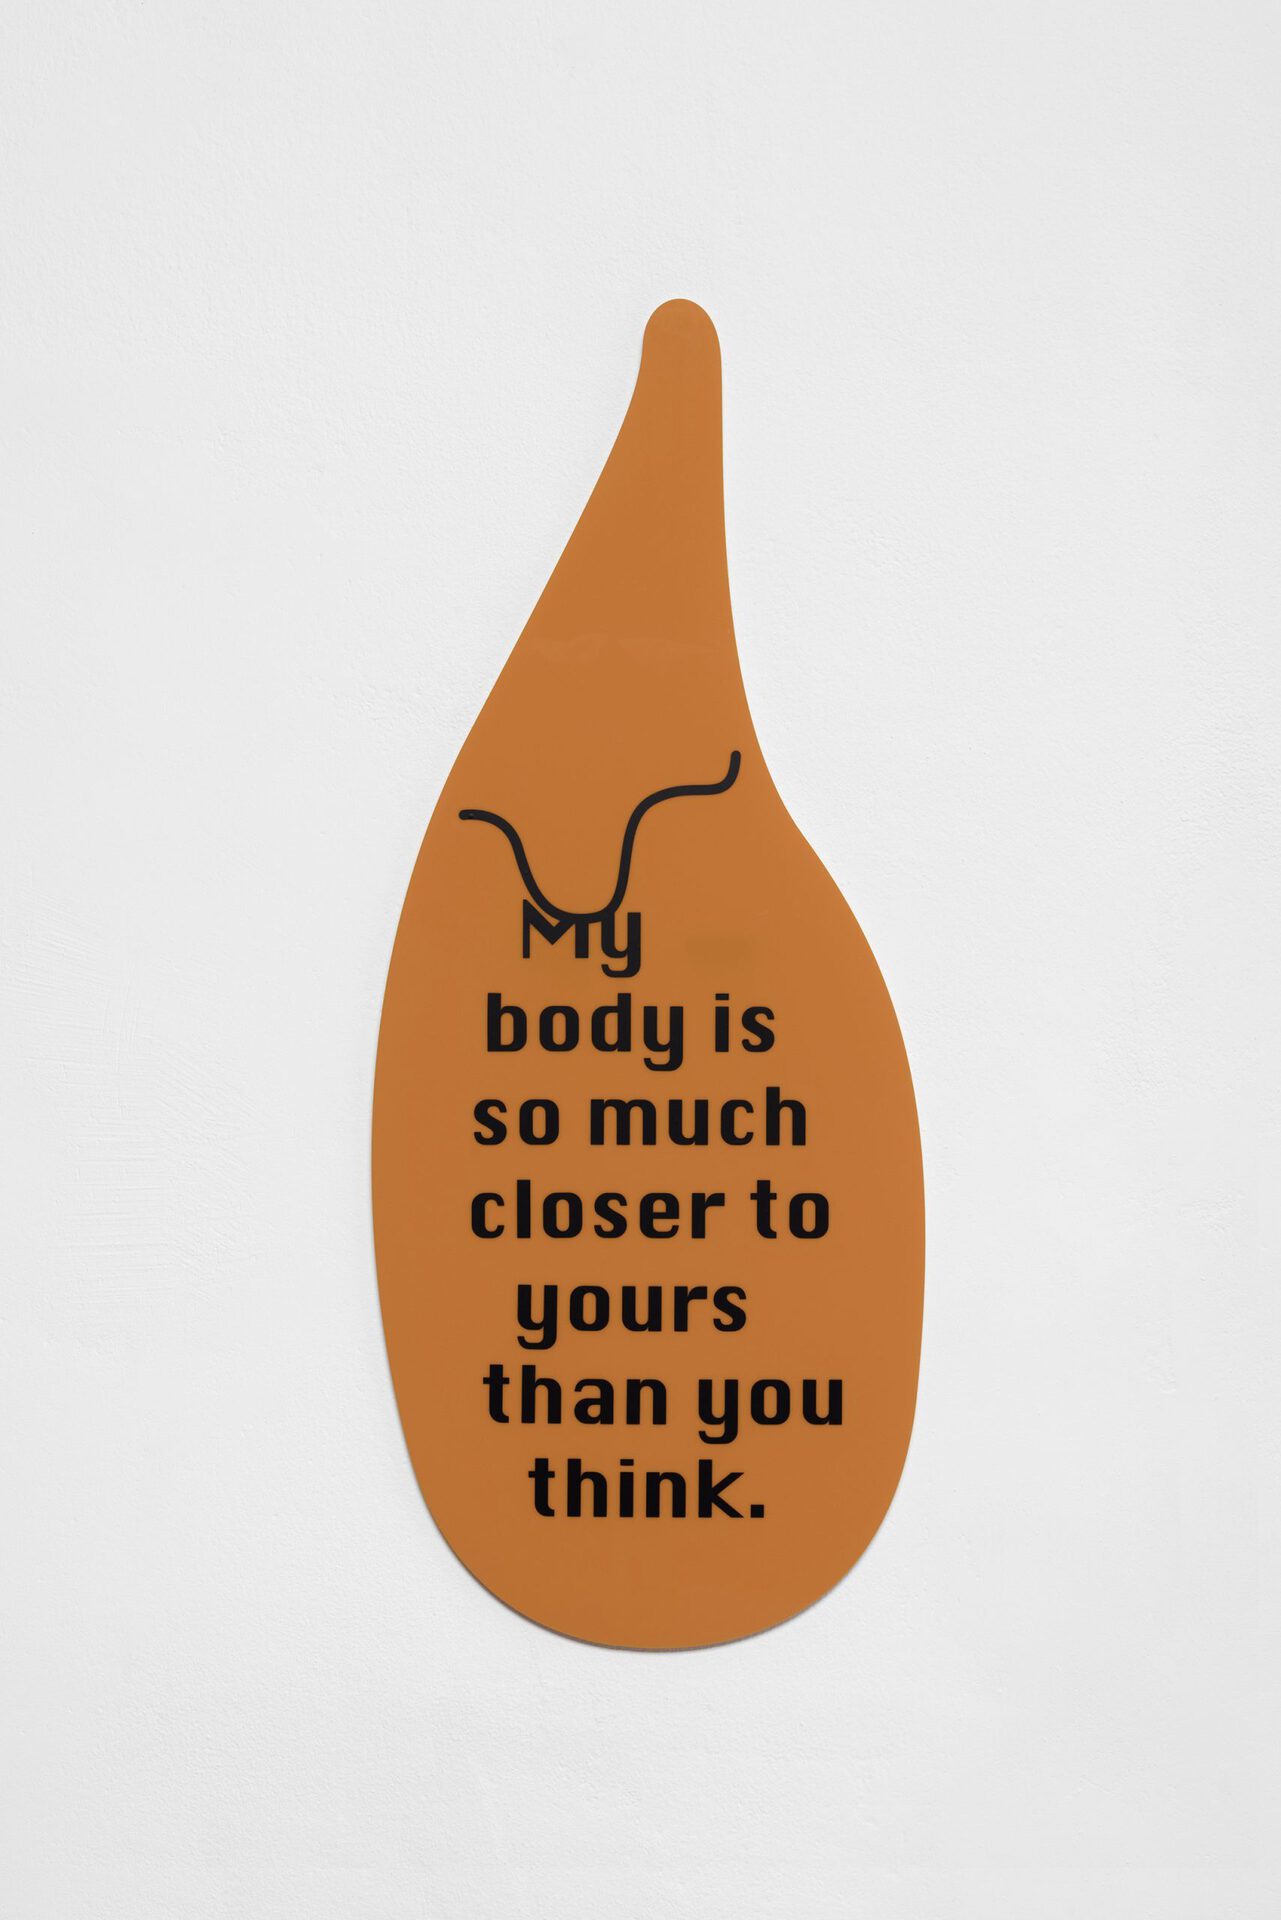 My body is so much closer to yours than you think, 2020, orange acrylic glas, black vinyl, 120 x 50 cm Foto @ Simon Veres